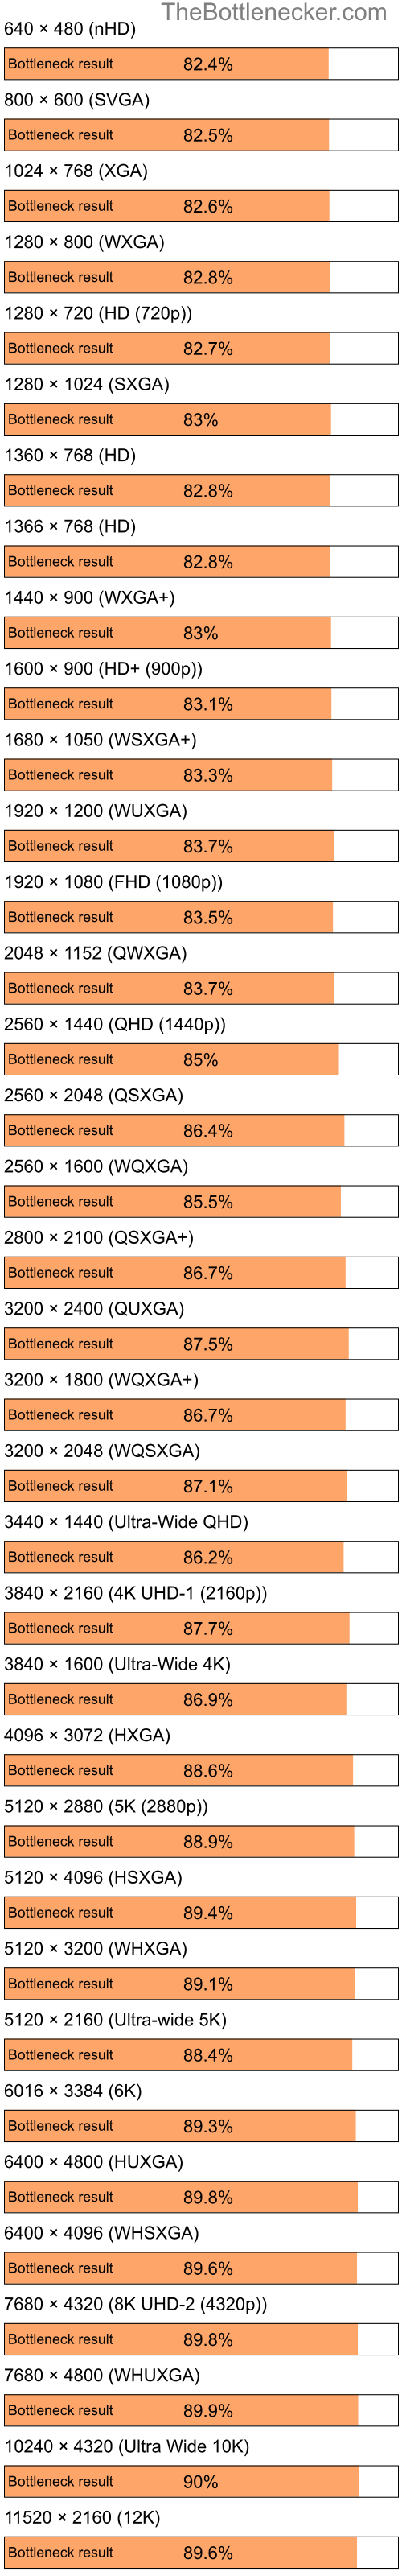 Bottleneck results by resolution for Intel Celeron M 420 and AMD Radeon X1270 in Graphic Card Intense Tasks